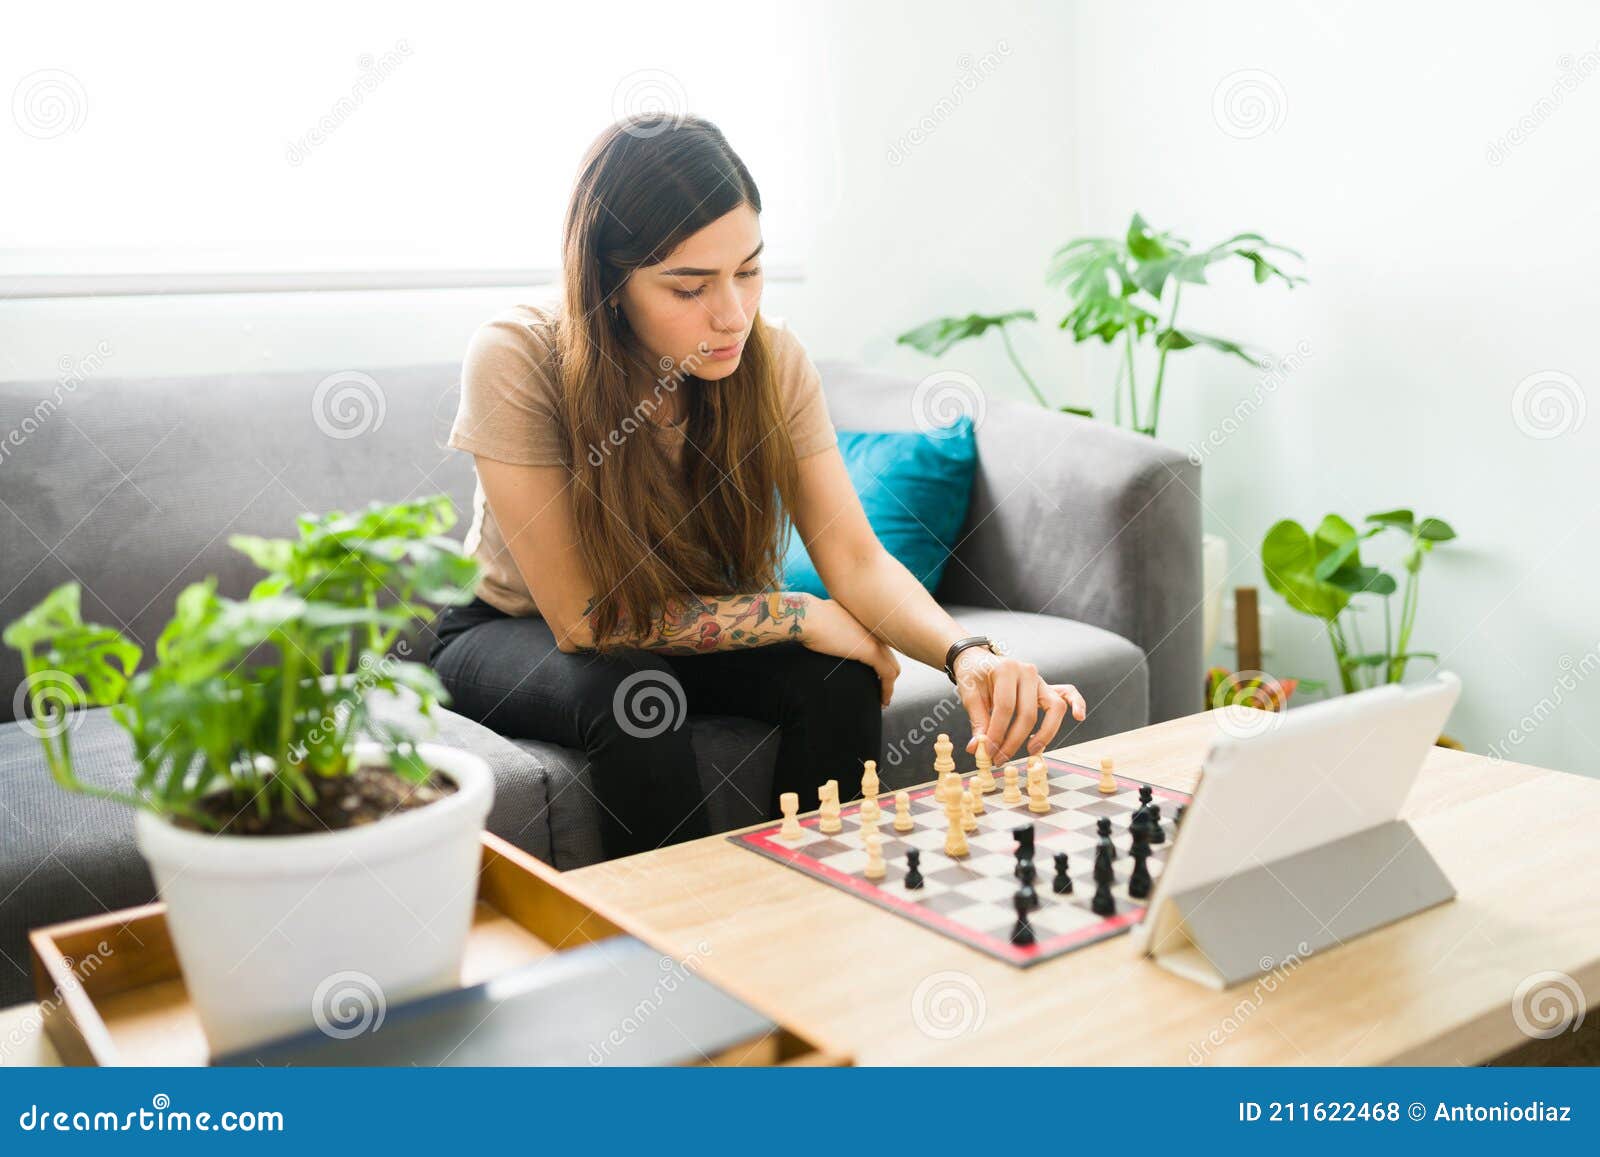 Premium Photo  Girl playing chess online on tablet computer